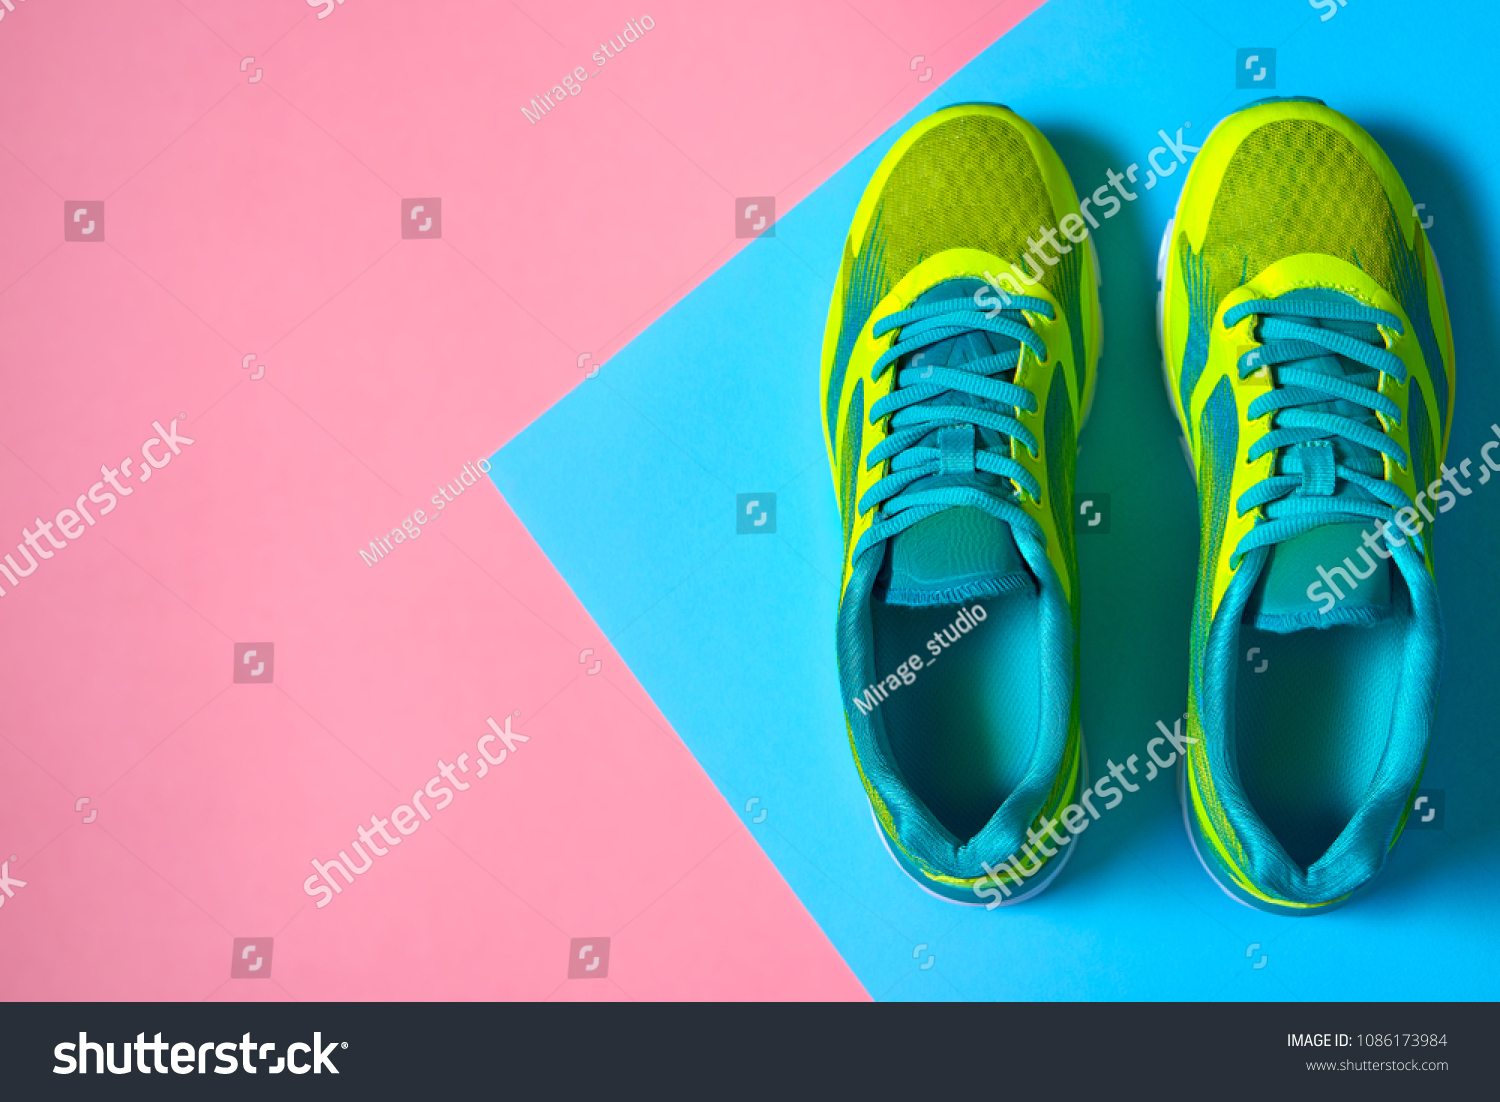 Pair of sport shoes on colorful background. New sneakers on pink and blue pastel background, copy space. Overhead shot of running shoes. Top view, flat lay #1086173984